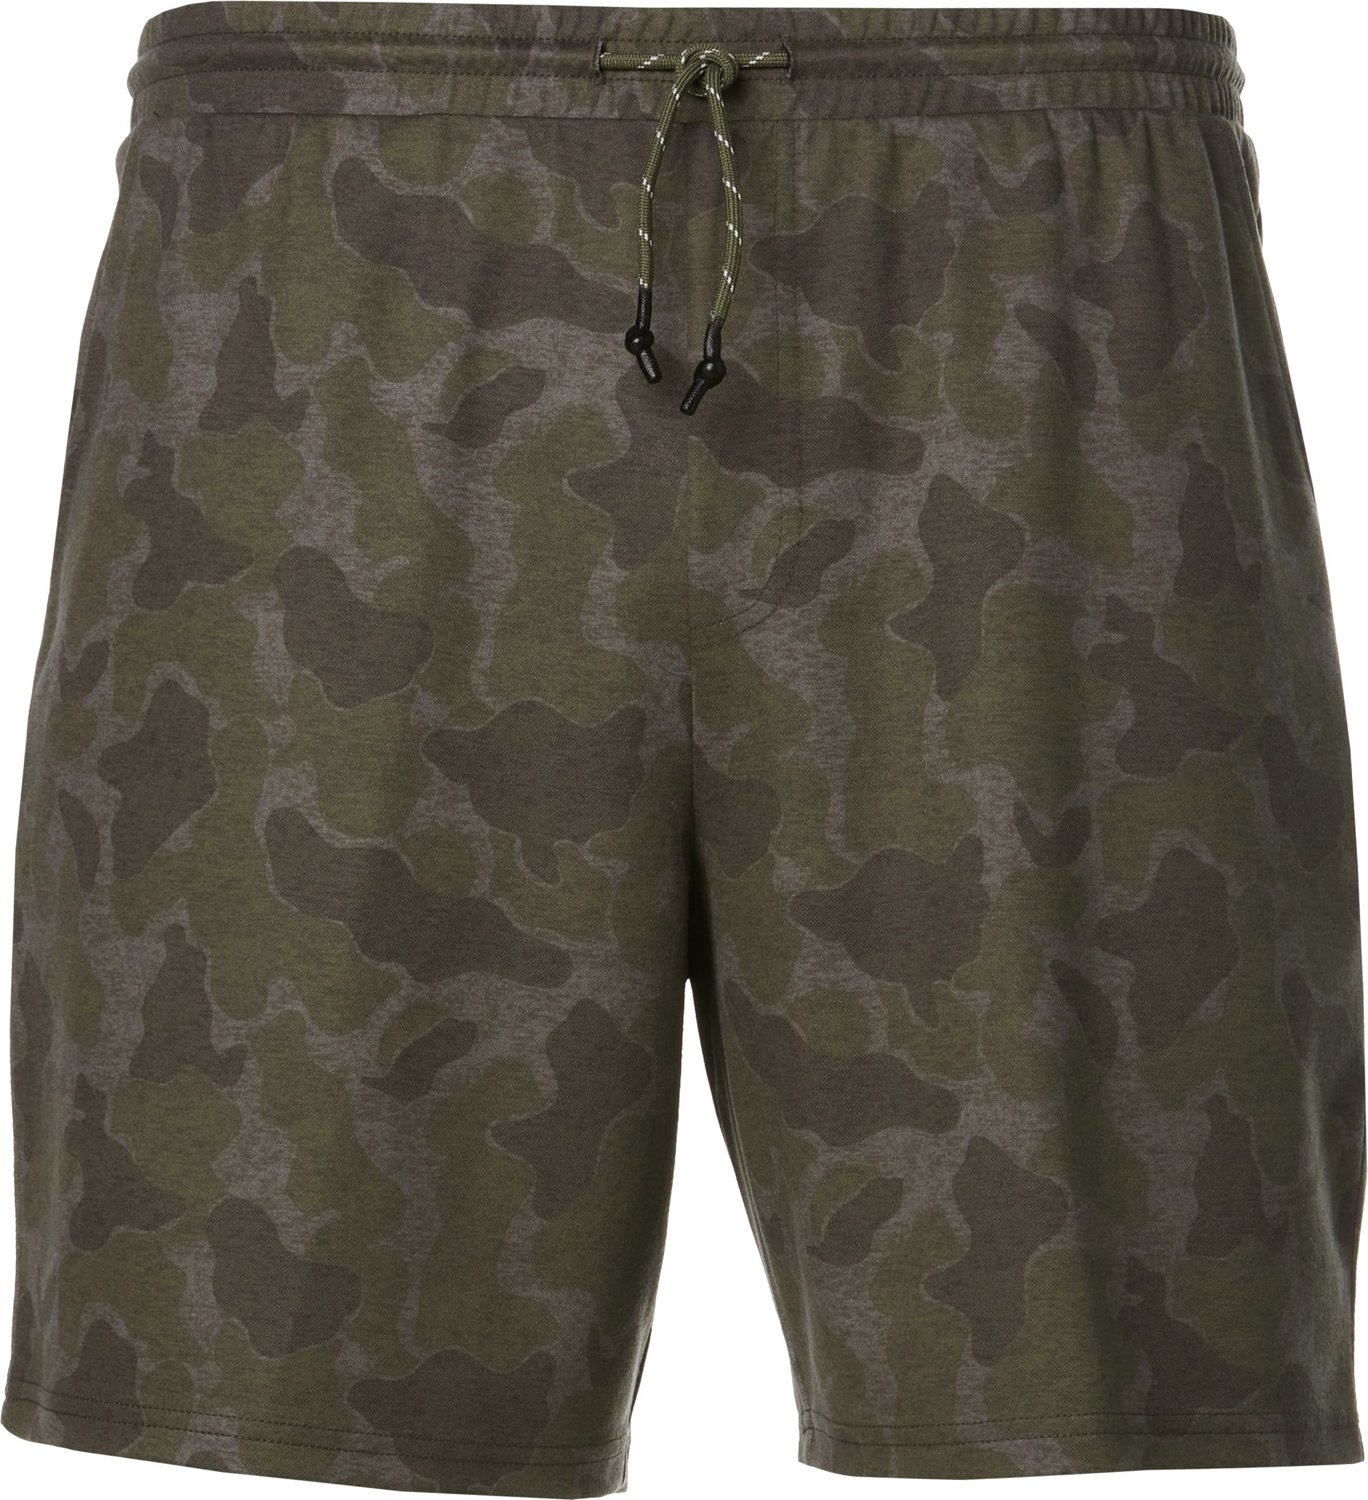 Magellan Outdoors Men's Campfire Shorts                                                                                          - view number 1 selected